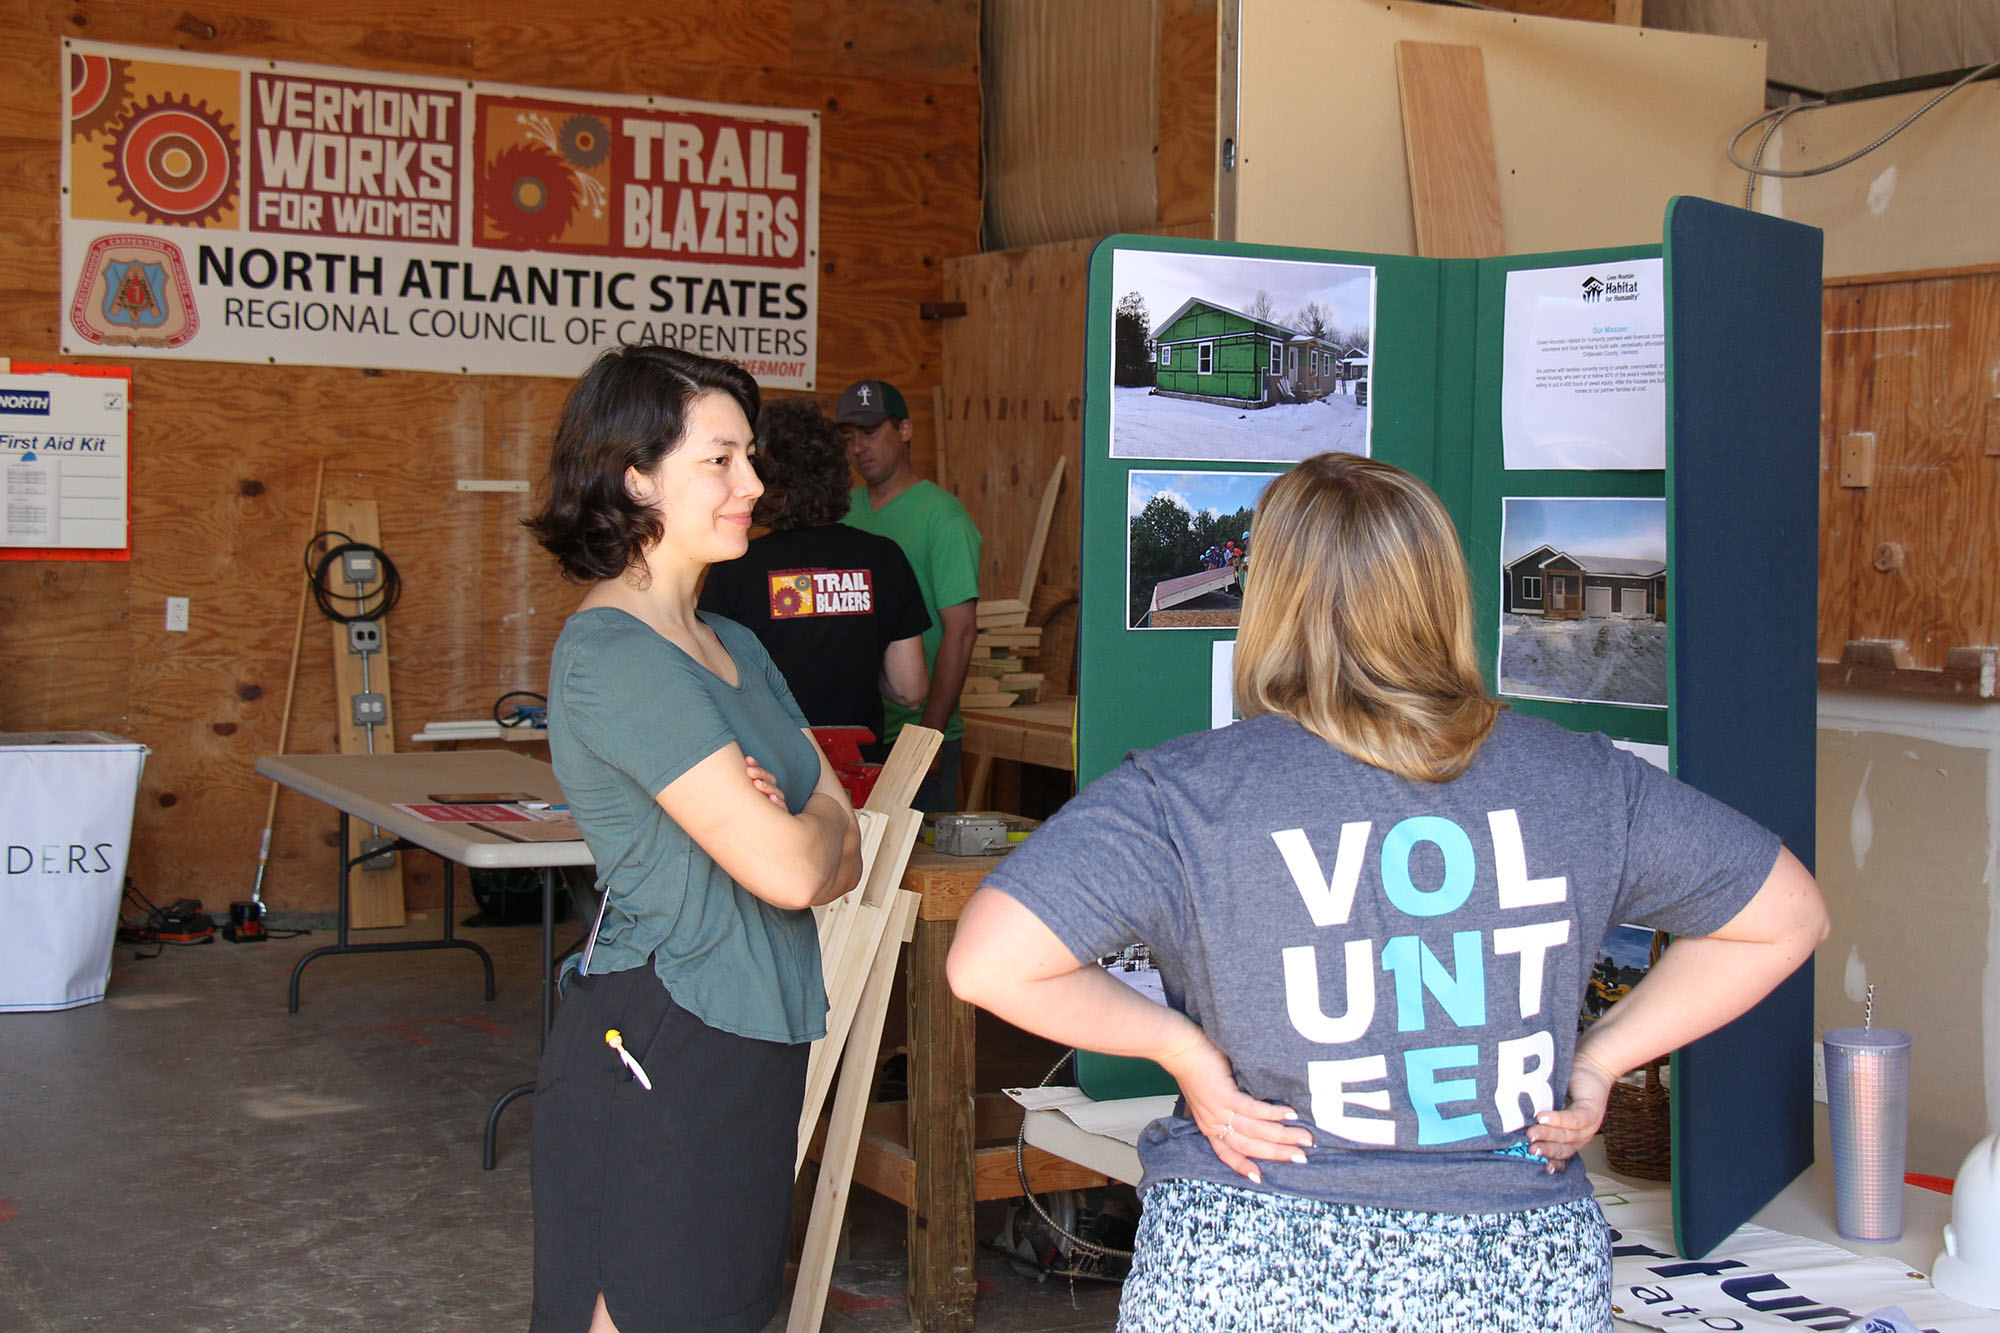 A Trailblazers Program participant attends a Vermont Works for Women hosted job fair with local employers who volunteer their time to discuss career pathways.